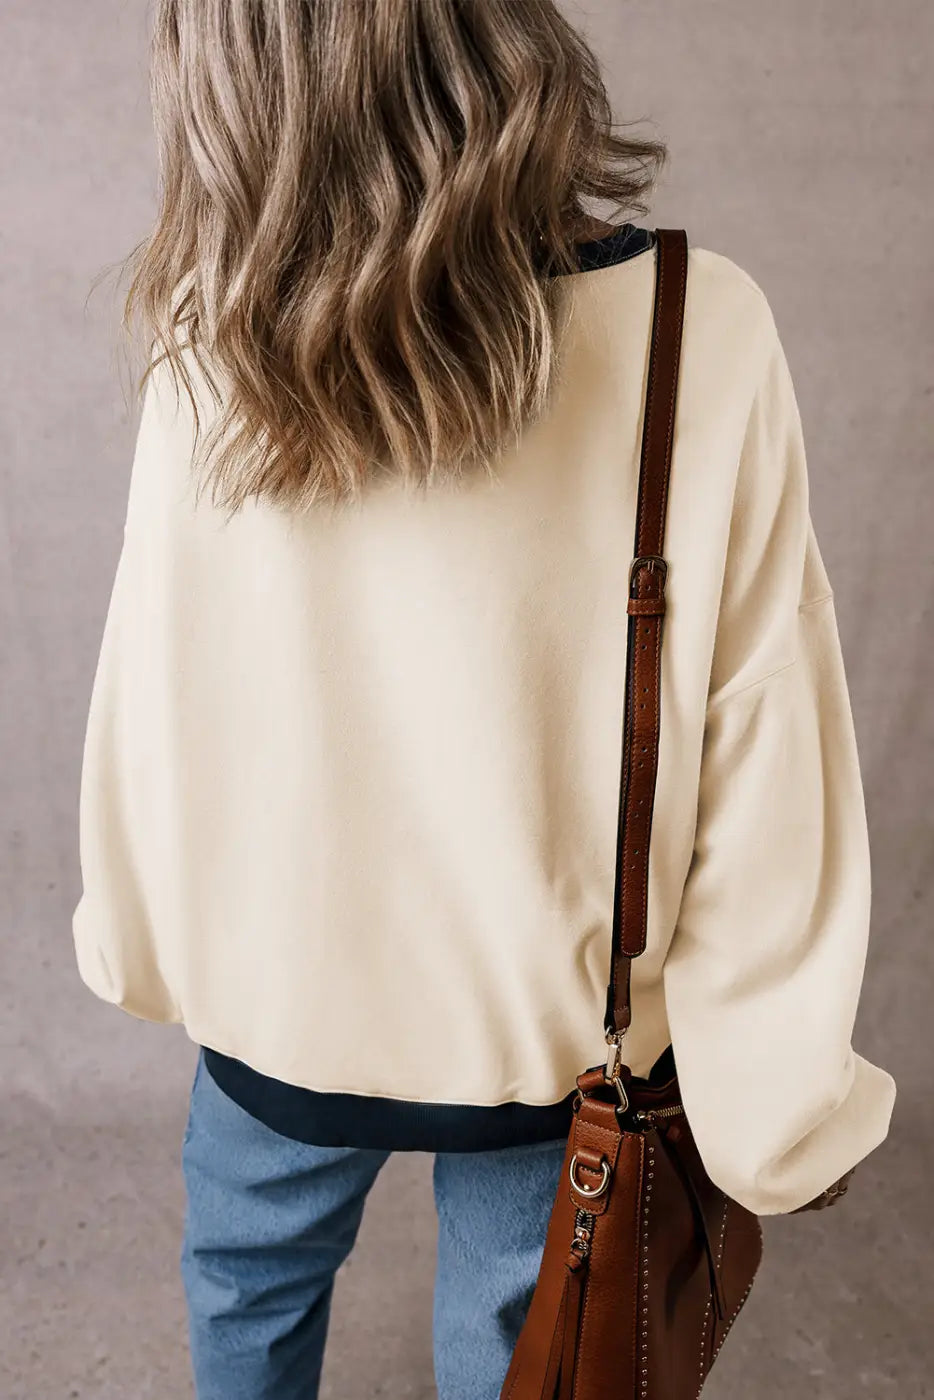 Casual oversized sweatshirt: cream sweater with blue jeans and brown leather shoulder bag